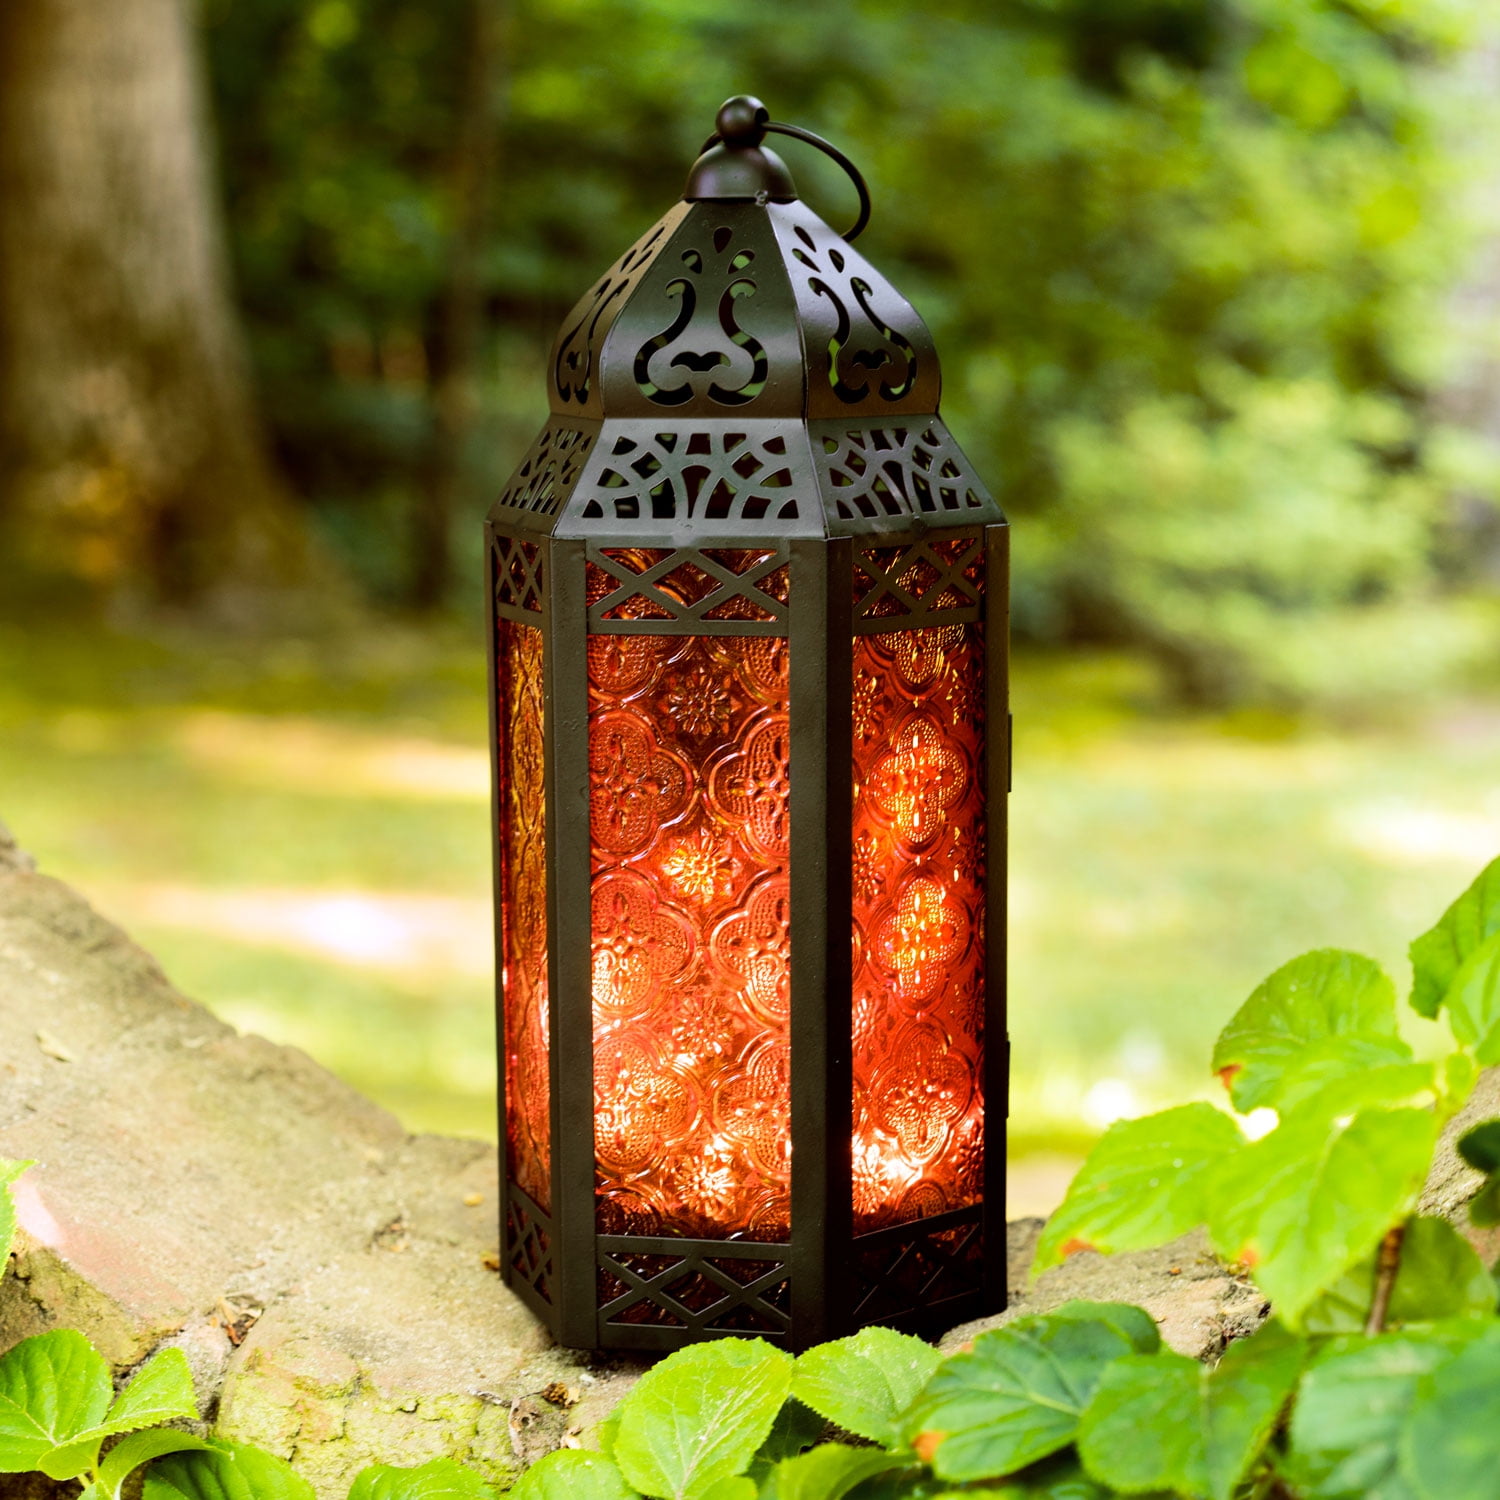 Lamplust Moroccan Lantern Decorative, 17 inch Large Lantern for Home Decor, Black and Gold Moroccan Decor, LED Fairy Lights Included, Star Candle